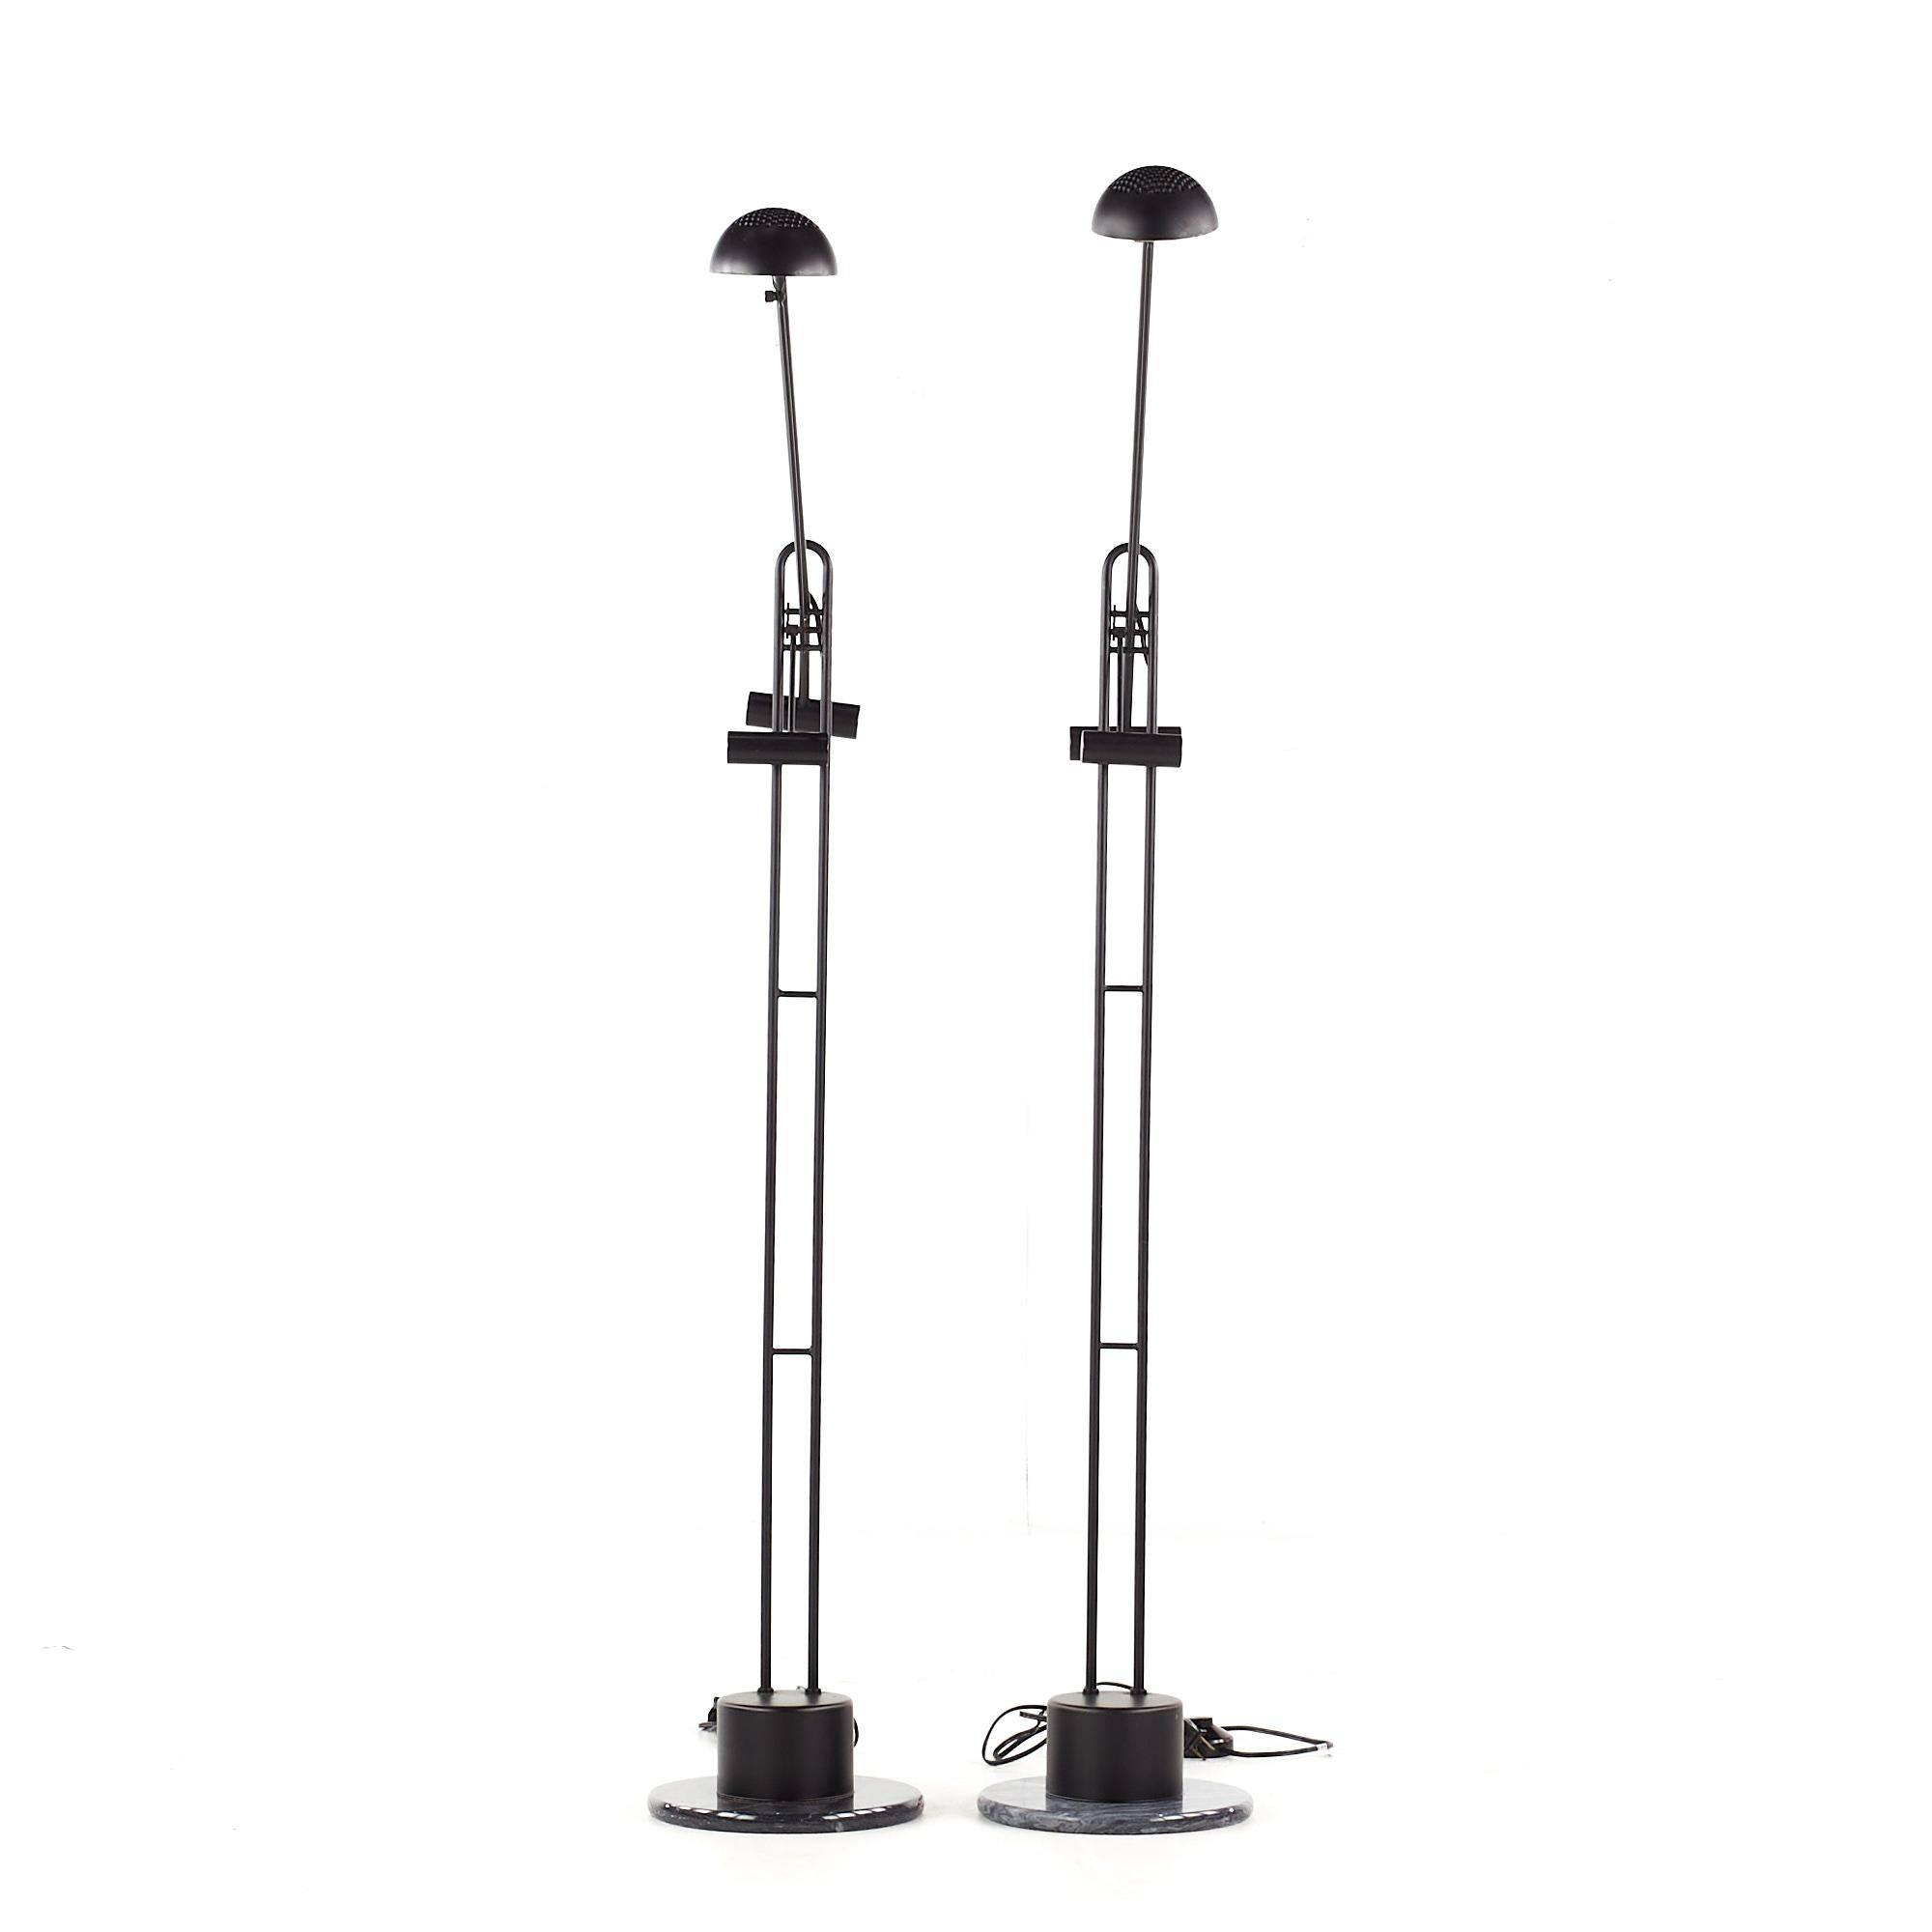 Artup Style Postmodern Cantilevered Marble Base Floor Lamp - Pair

Each floor lamp measures: 9 wide x 9 deep x 55 inches high
(height is adjustable)

These lamps are in Good Vintage Condition.

We take our photos in a controlled lighting studio to